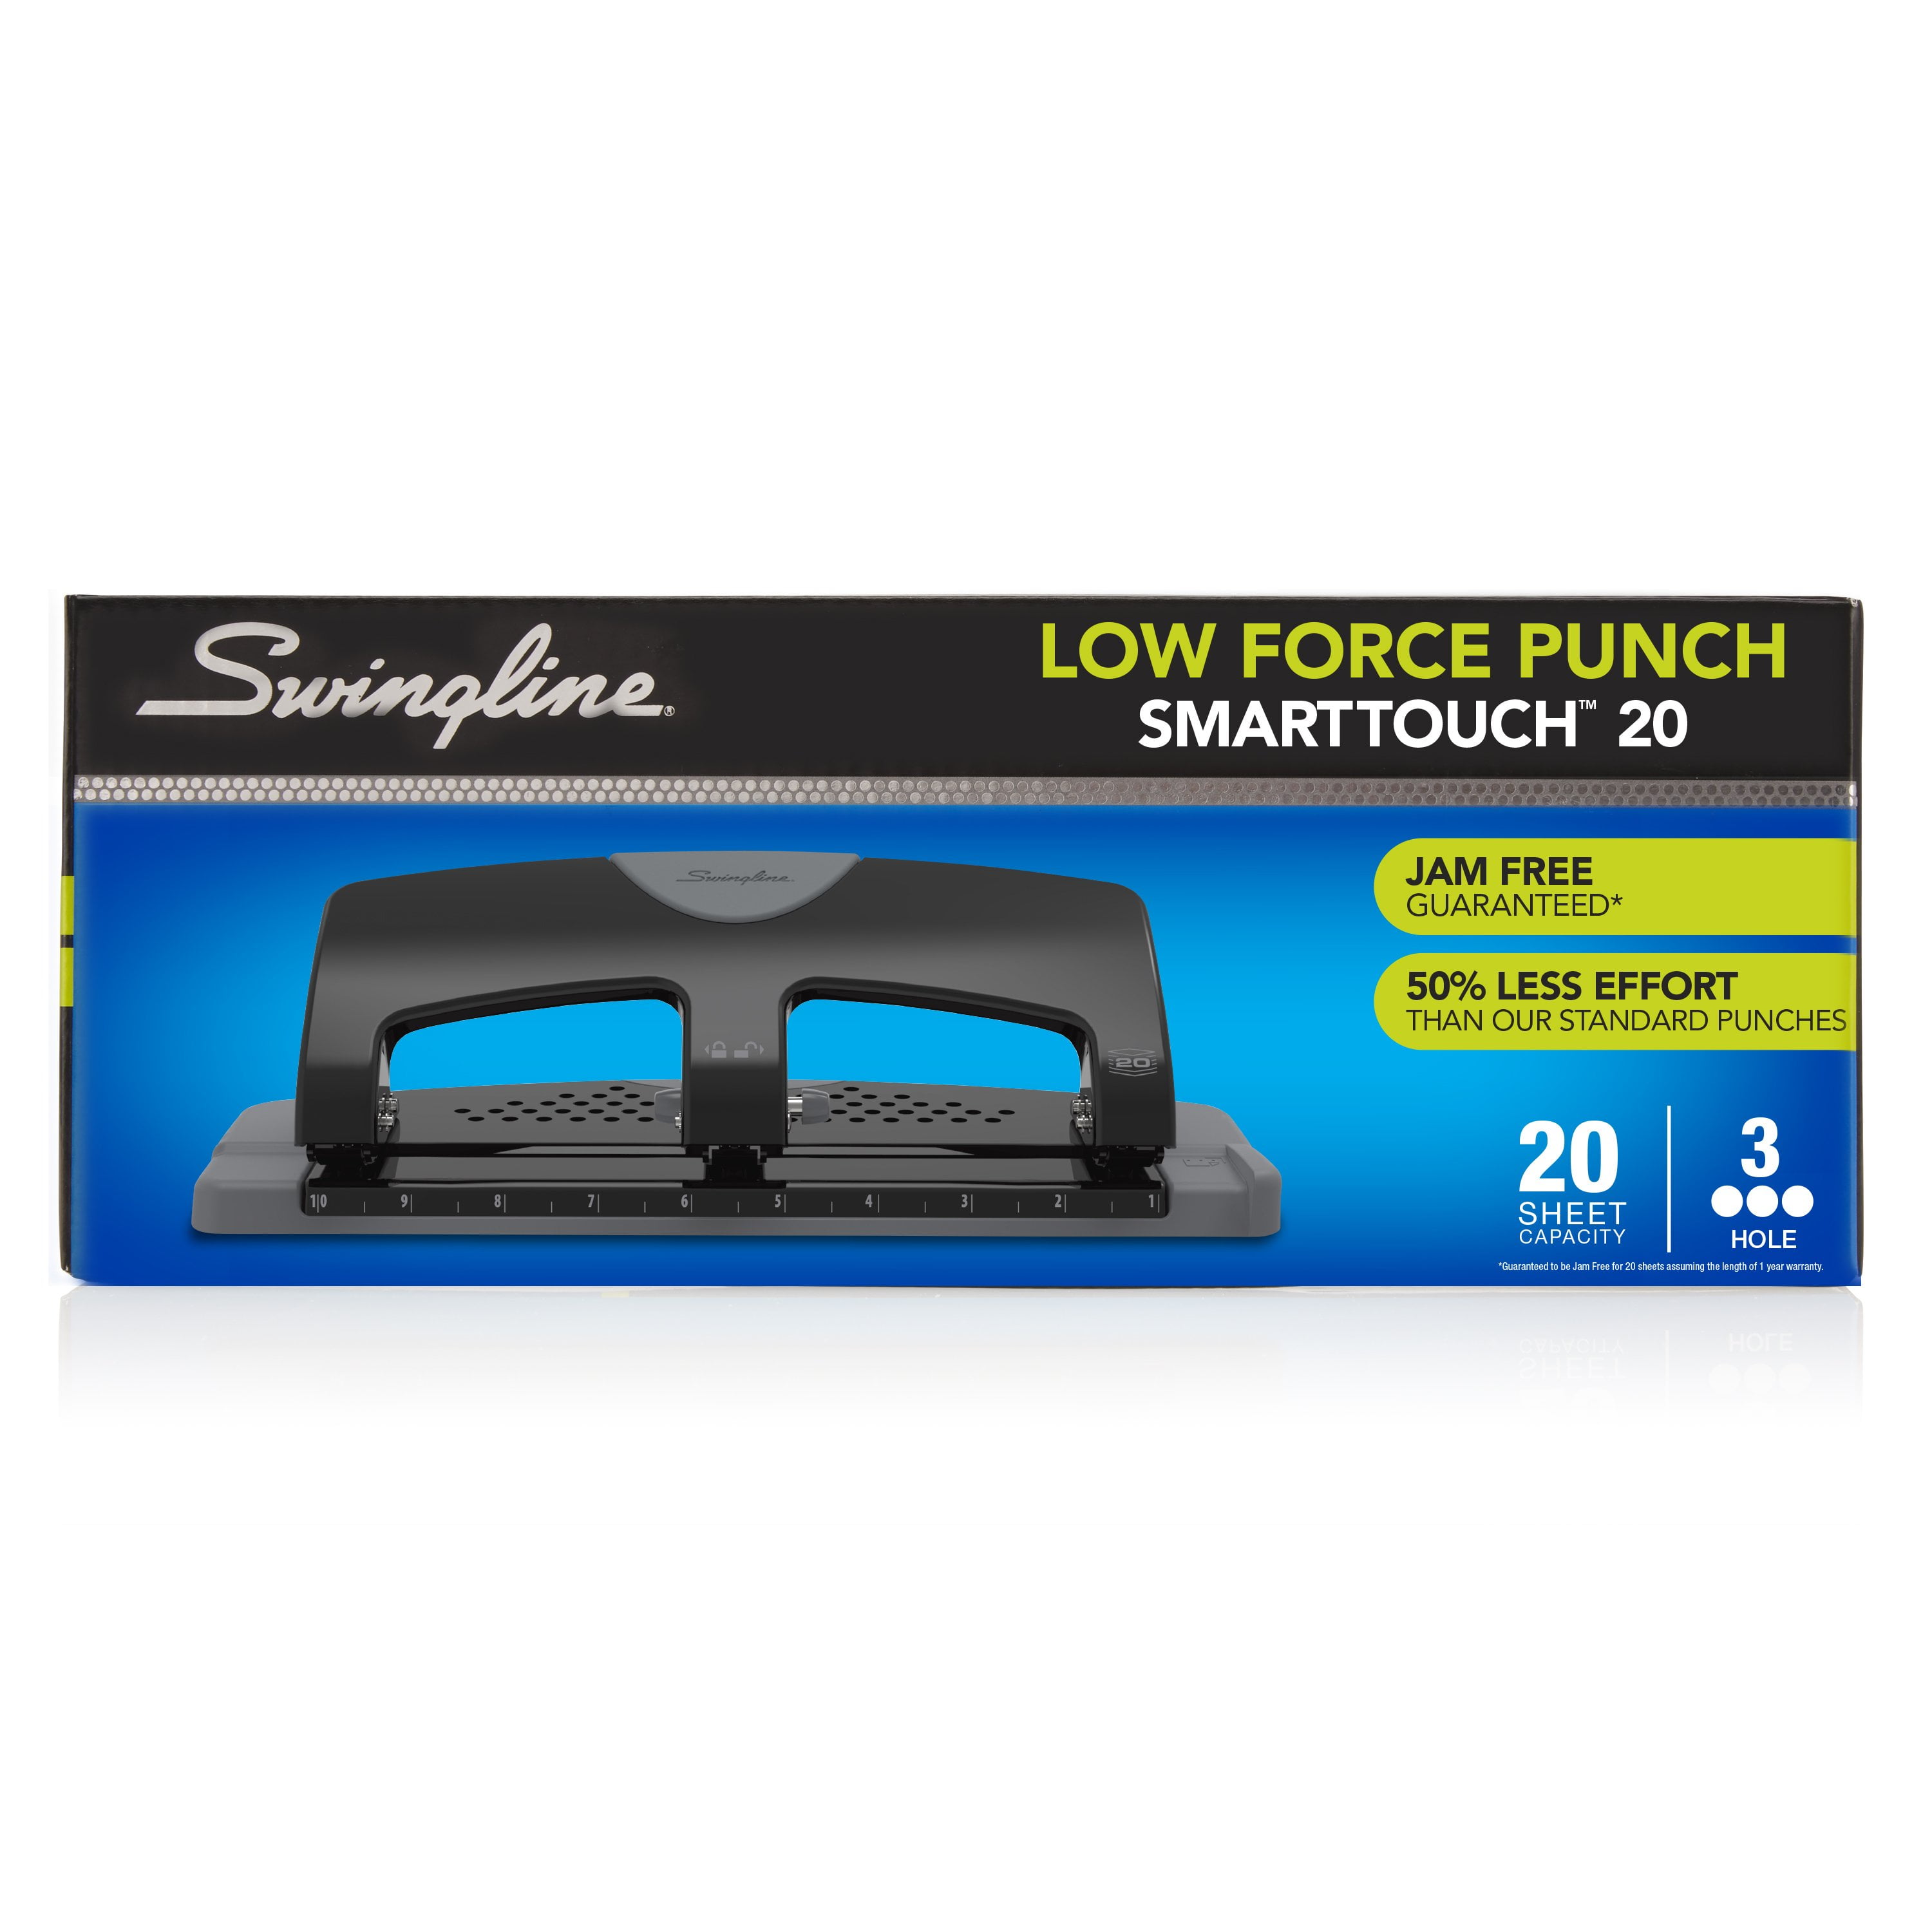 Swingline 3 Hole Punch, Desktop Hole Puncher 3 Ring, 45 Sheet Punch  Capacity, Low Force, Smarttouch, Black/Gray (74136) - Imported Products  from USA - iBhejo